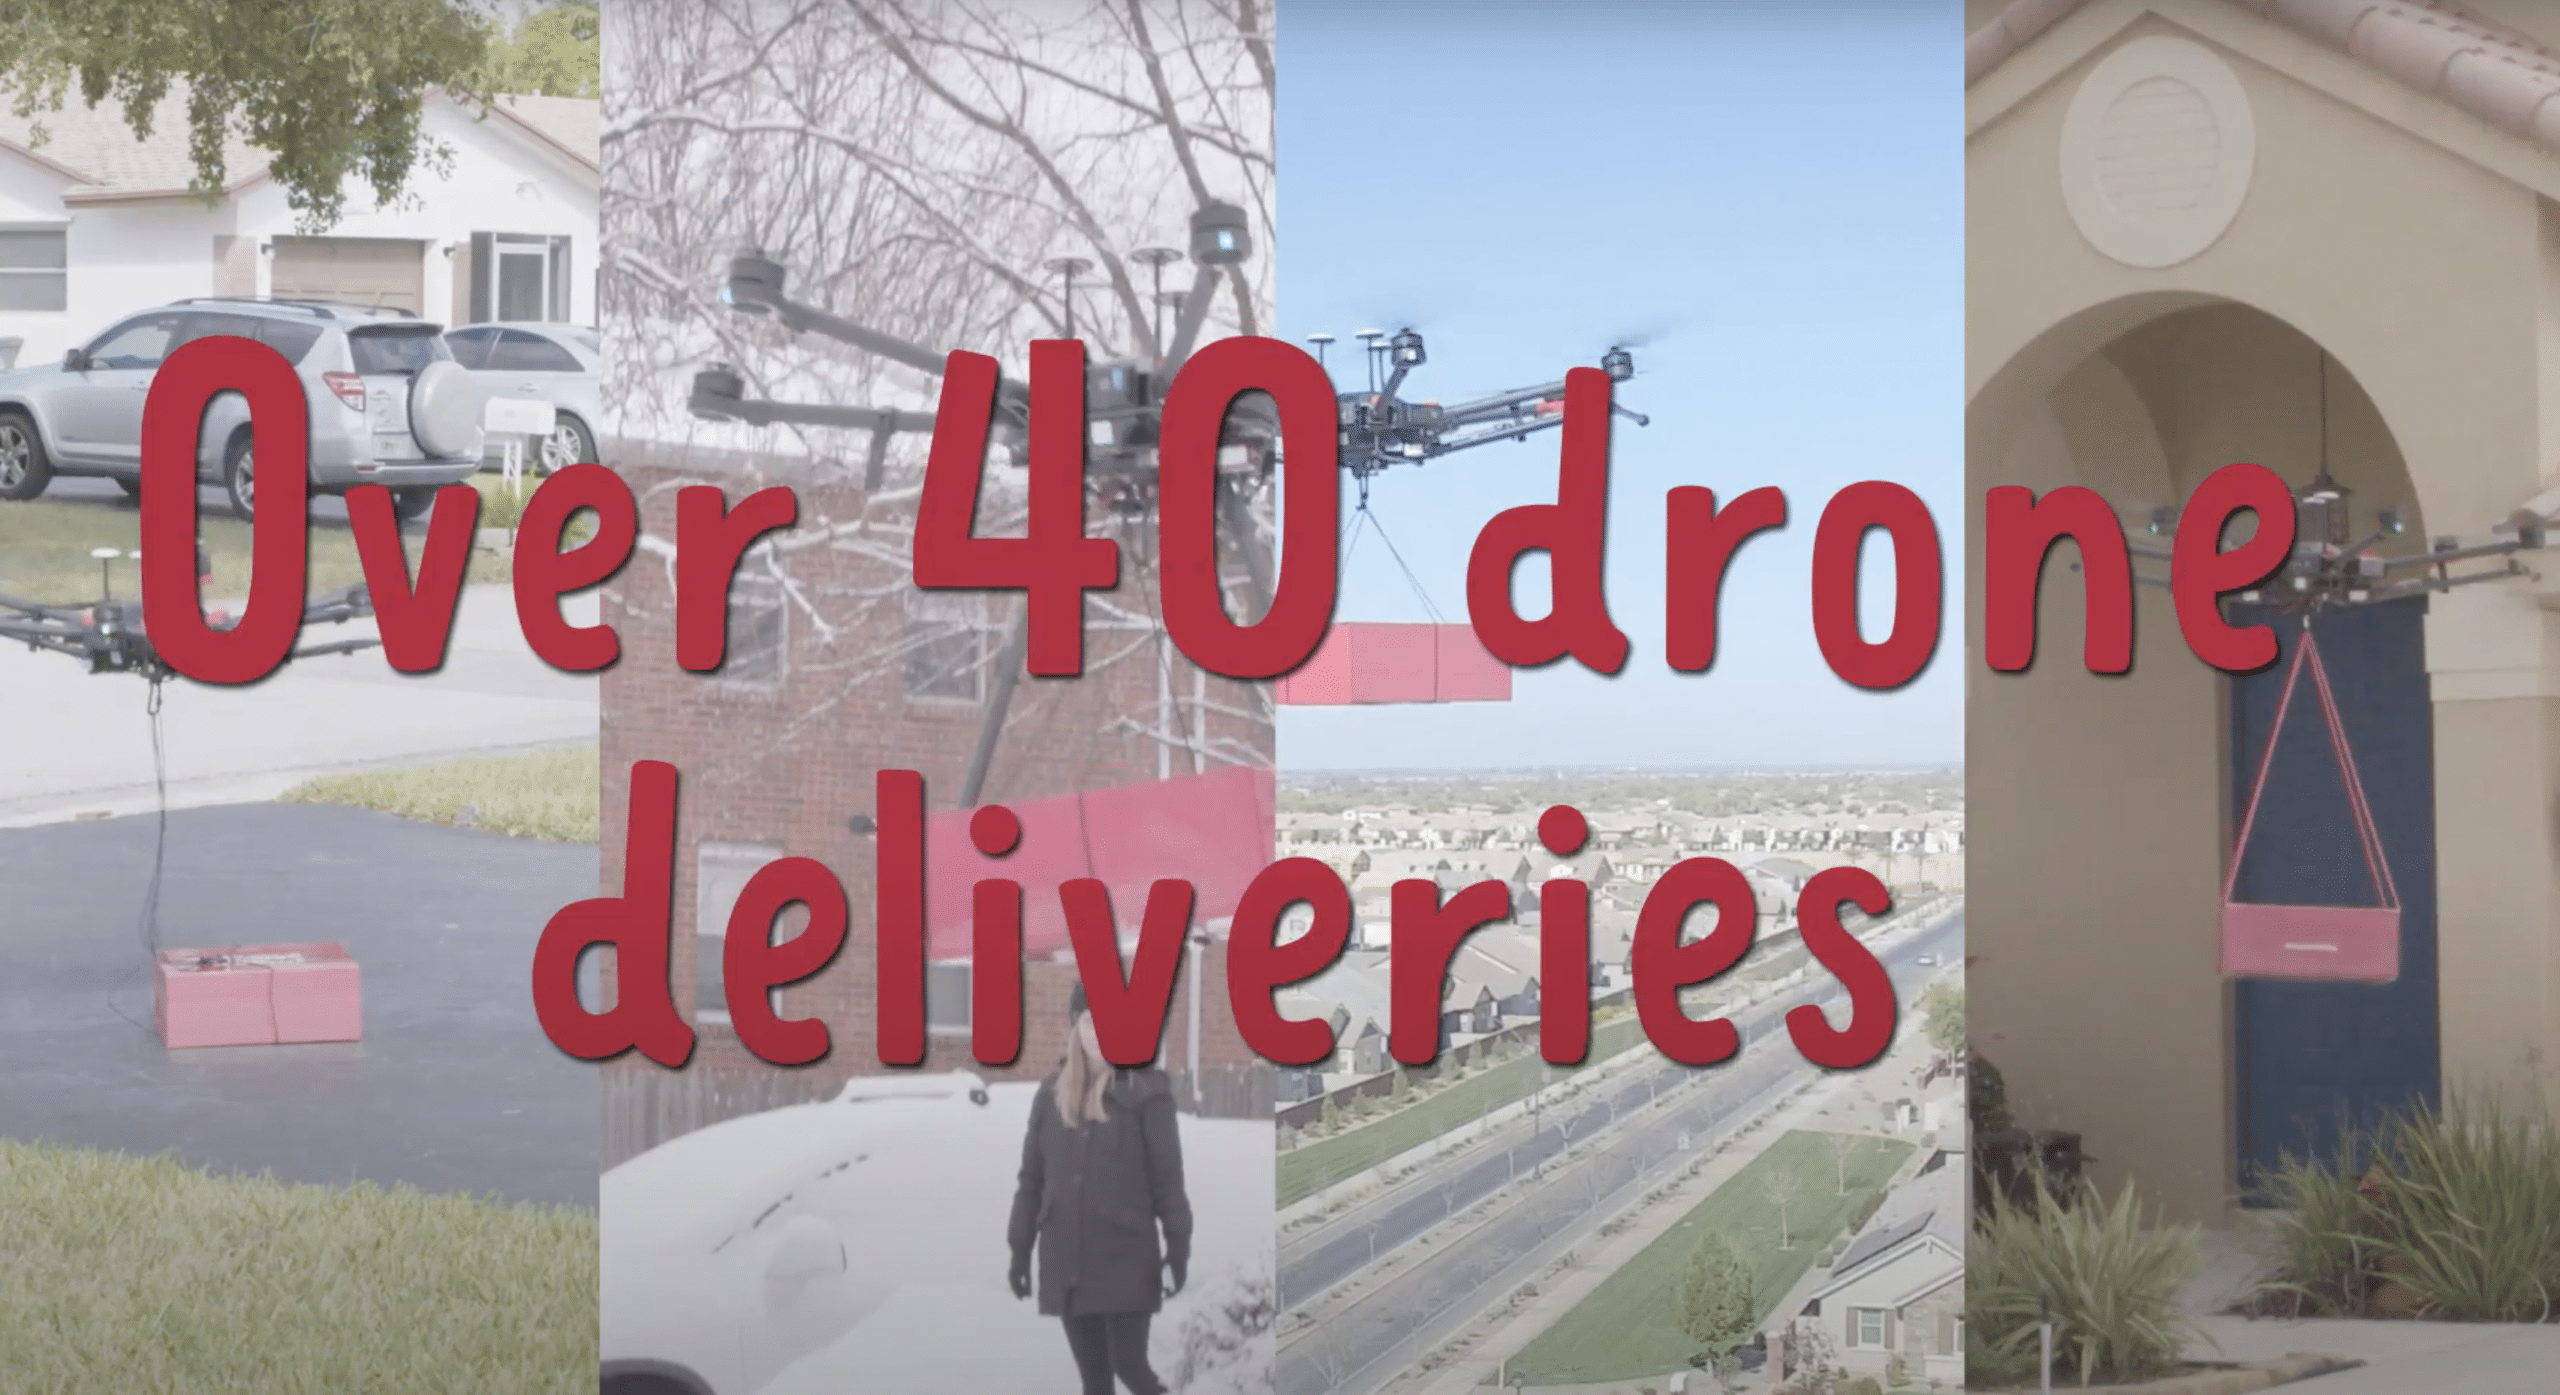 over 40 drone deliveries with images of drones dropping off packages